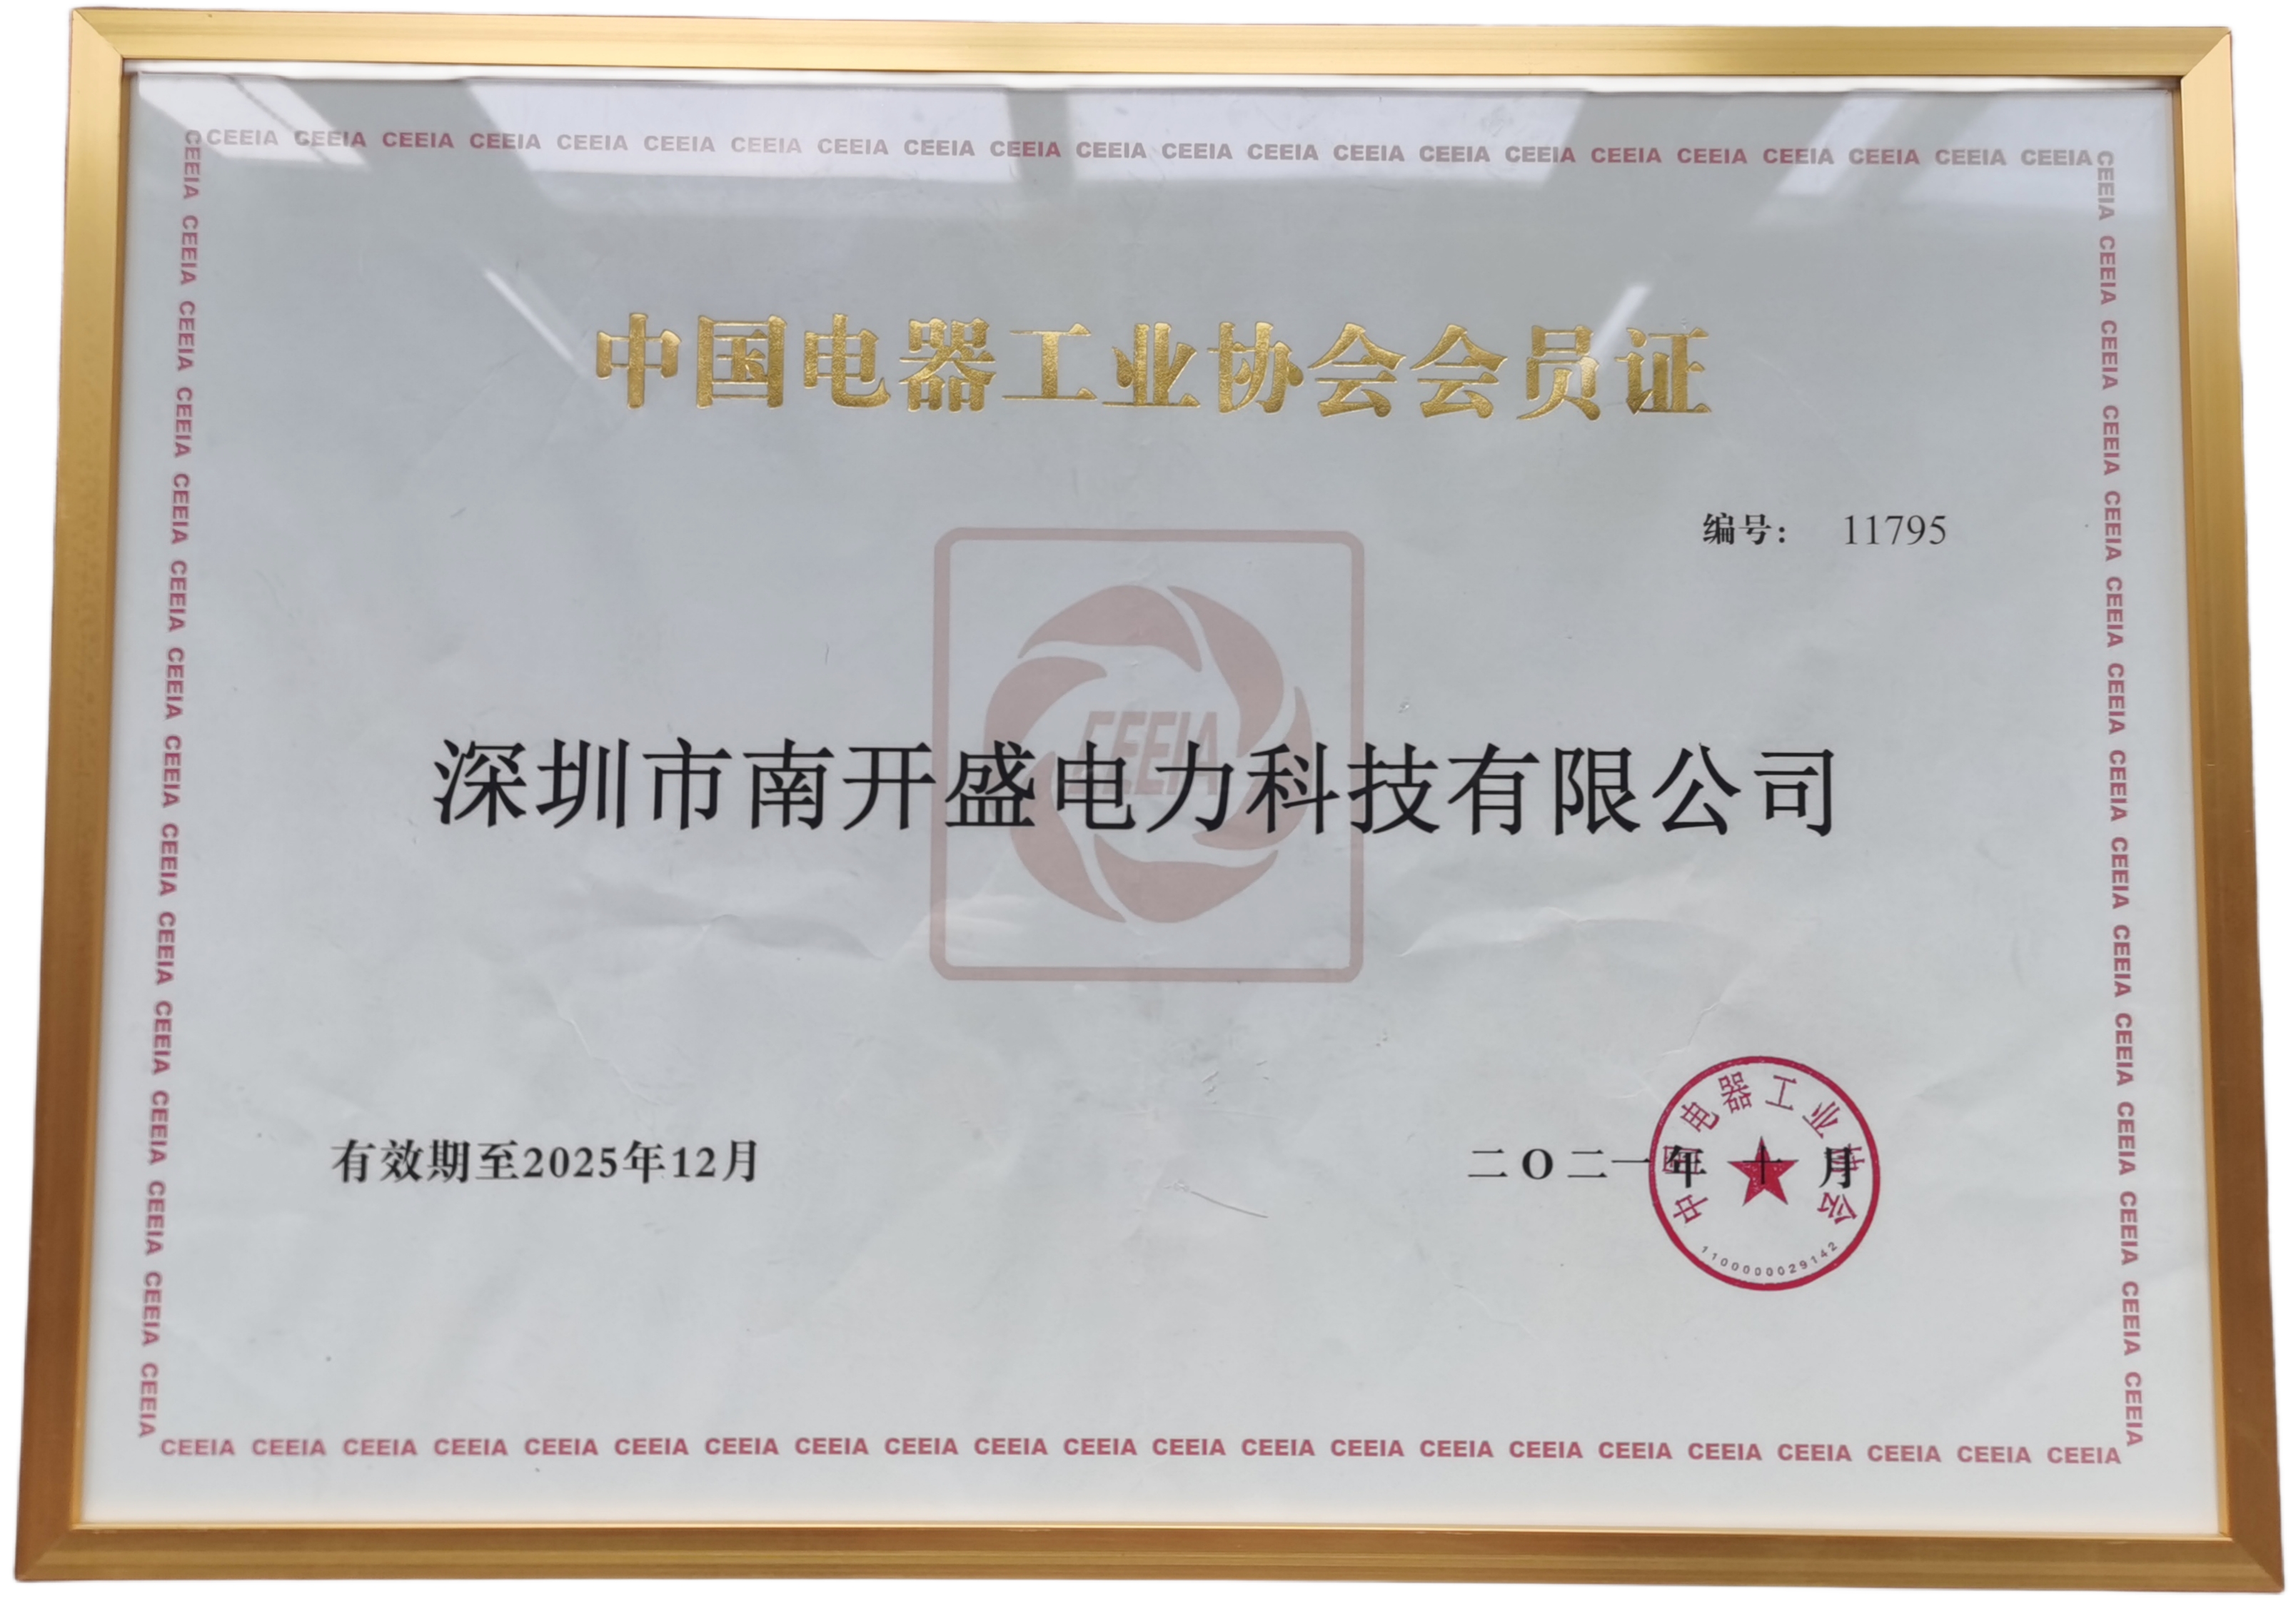 Member of China Electrical Equipment Industry Association